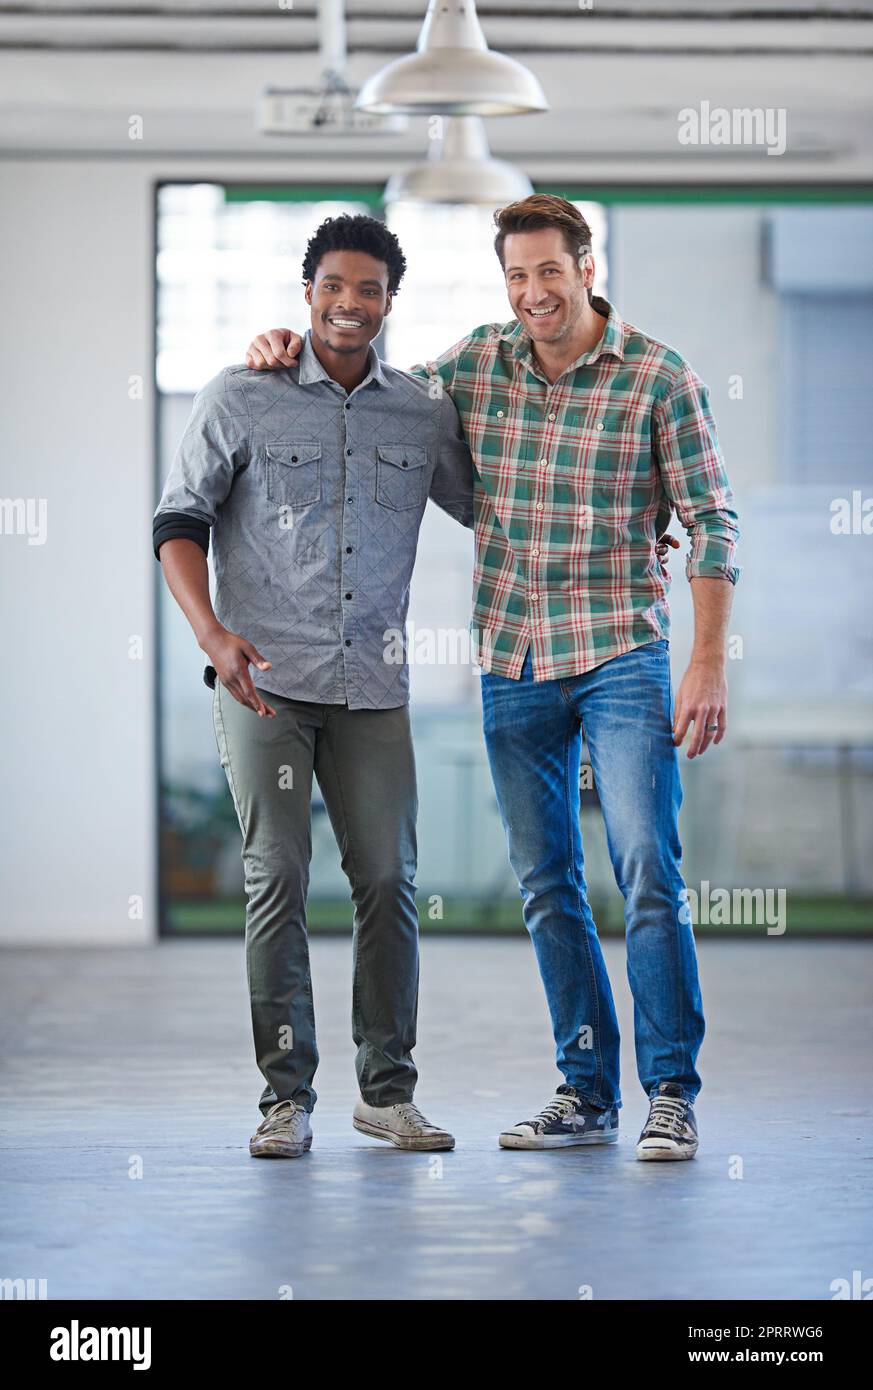 Diverse minds for strong bonds. Two handsome men standing arm in arm smiling at the camera. Stock Photo